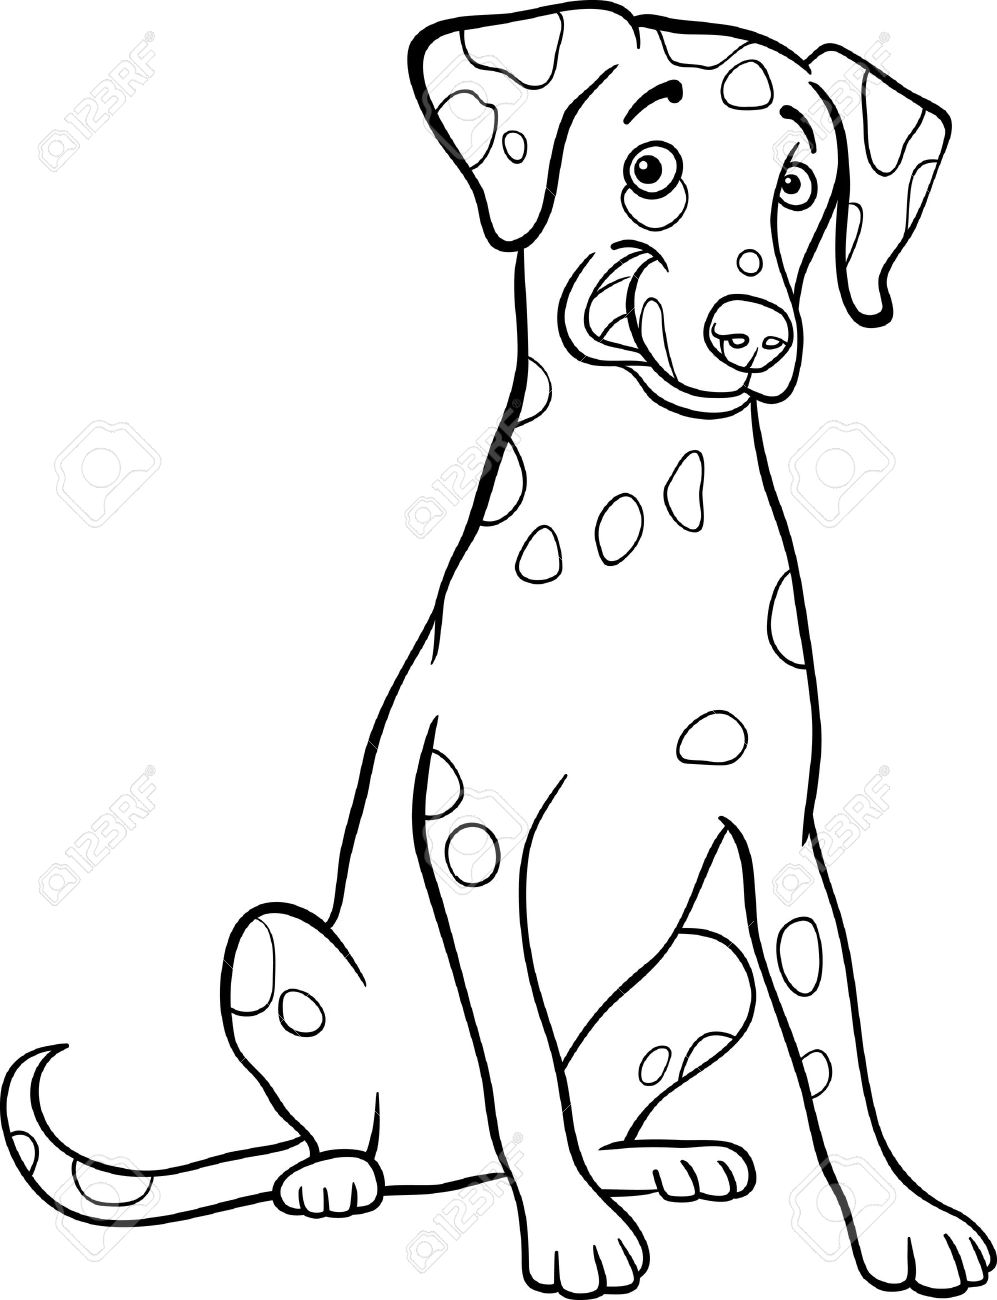 Dalmatian clipart black and white 2 » Clipart Station.